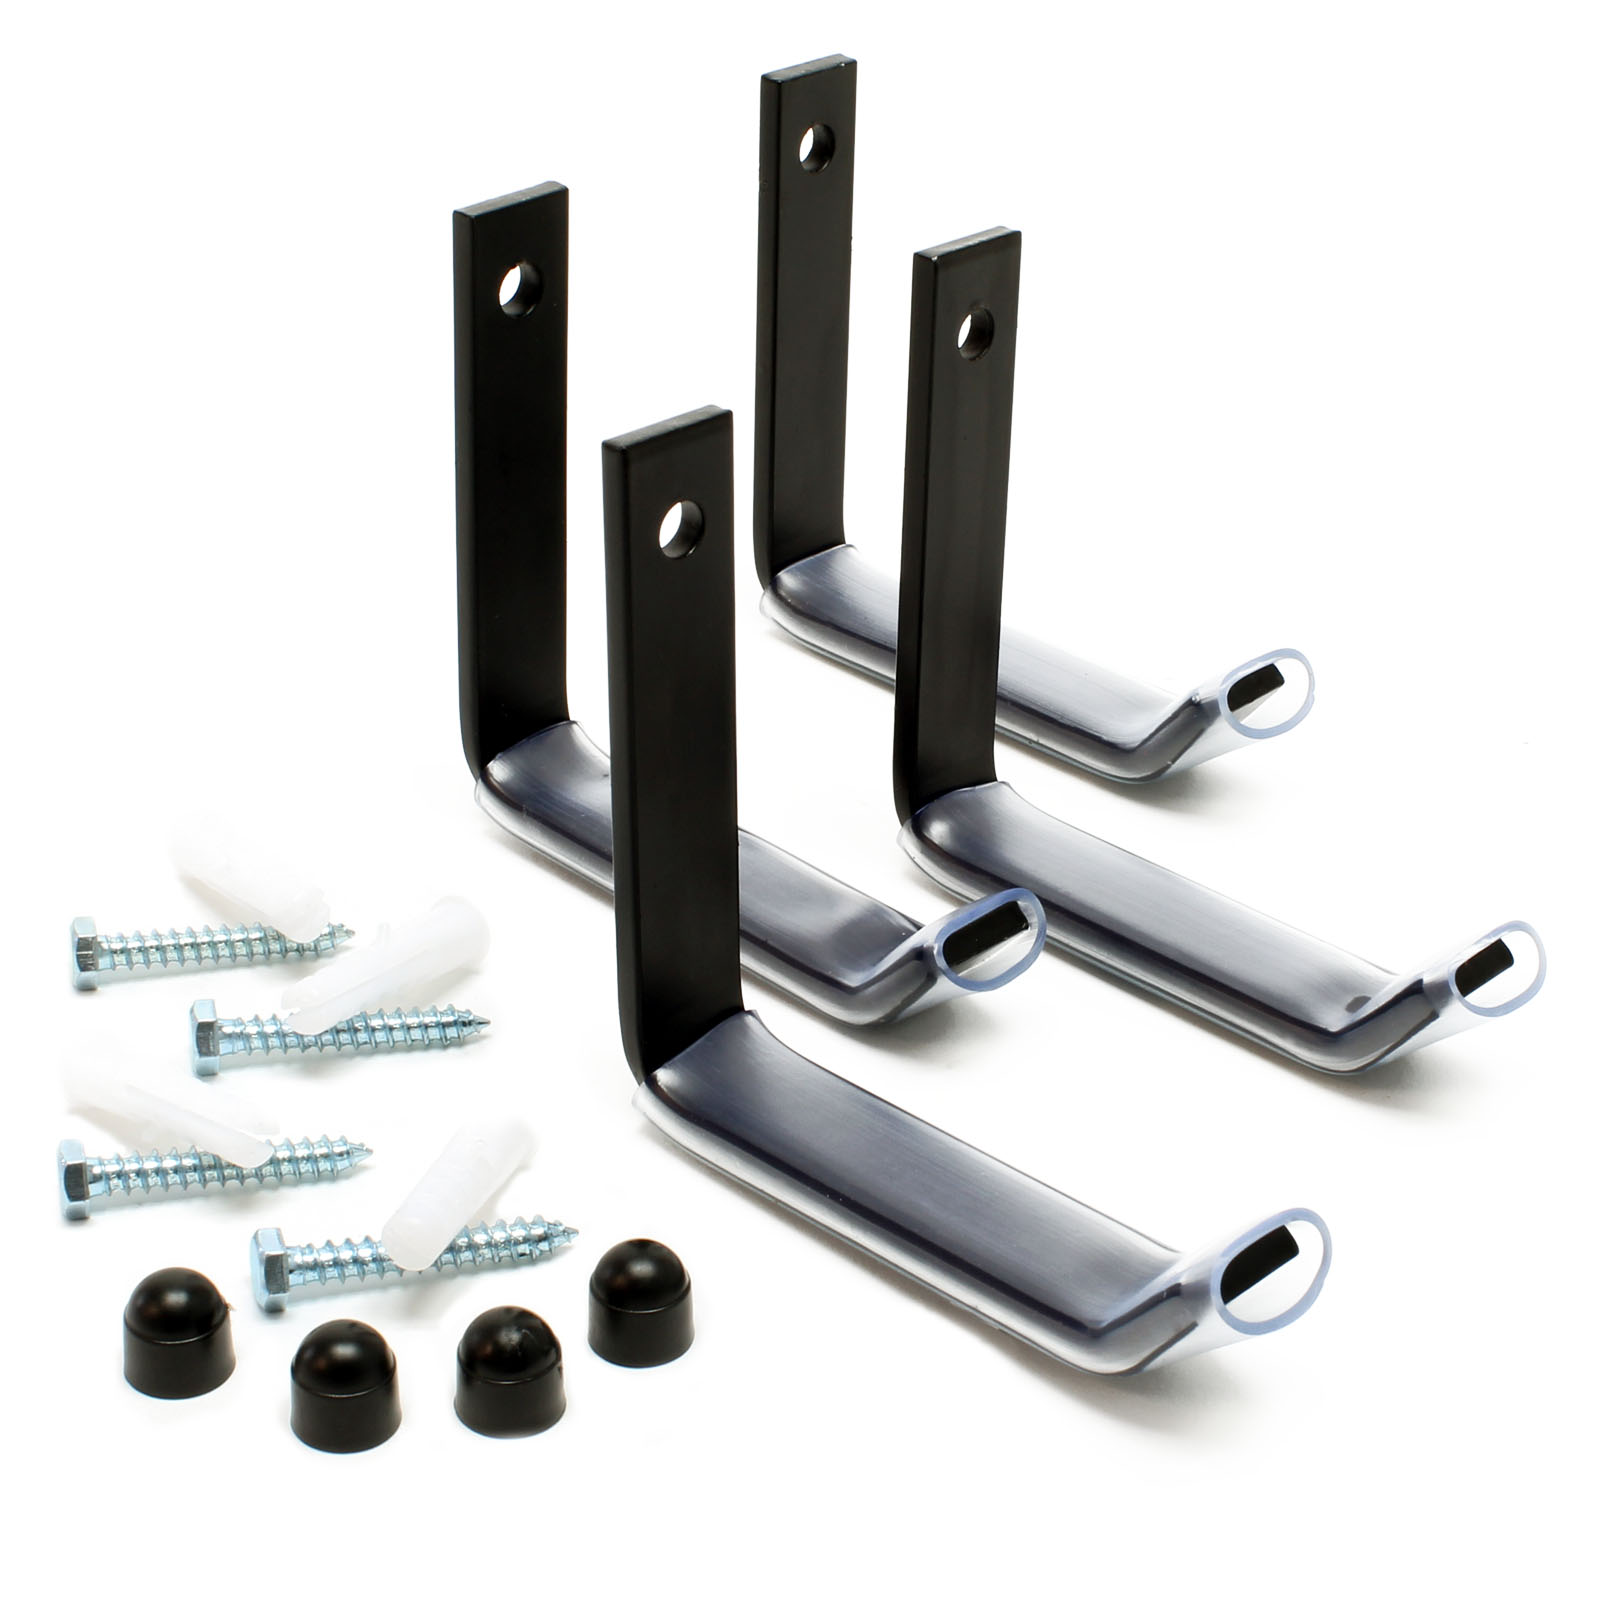 Wiltec Mobile Multi Tyre Stand Wheel Storage Rack System up to 225 mm 